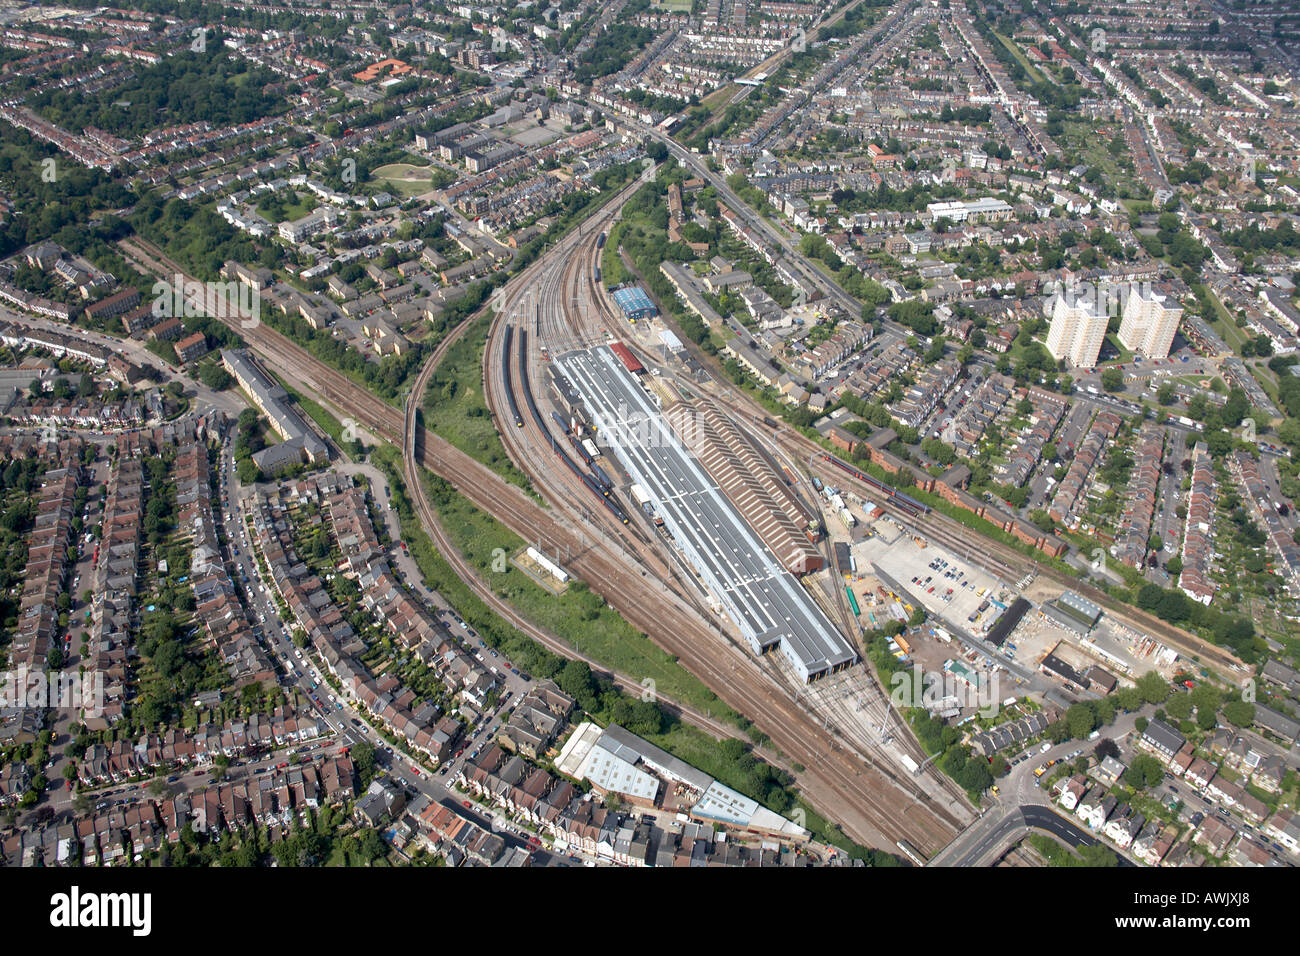 High level oblique aerial view north of train depot Wood Green Wood Green Haringey London N22 England UK Stock Photo